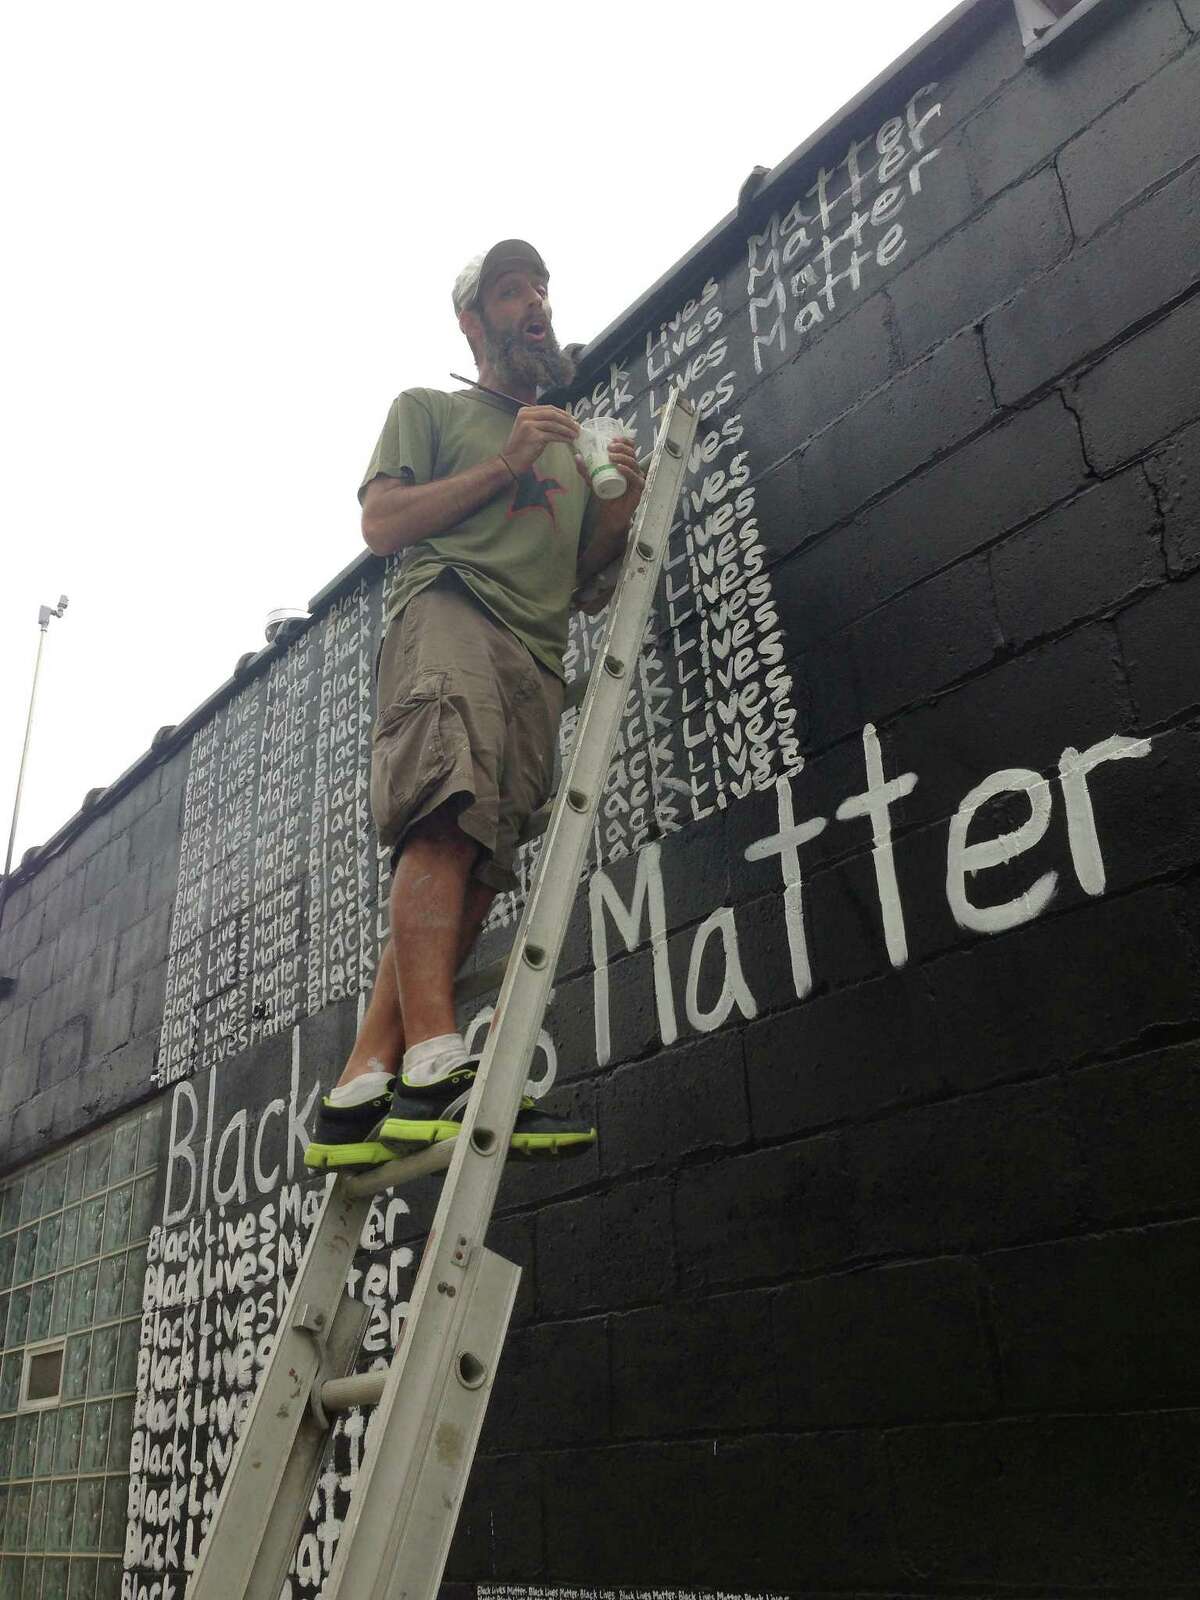 Renda Writer, a white muralist from Miami is expressing his support for the "Black Lives Matter" movement one word at a time on a Detroit art gallery exterior wall, Friday, Sept. 18, 2015, in Detroit. Writer tells The Associated Press that when the commissioned project is completed the phrase will have been written thousands of times. Writer started Monday behind the N'Namdi Center for Contemporary Art and says he is using art "to raise awareness to the disproportionate numbers of blacks being killed by police." (AP Photo/Corey Williams)